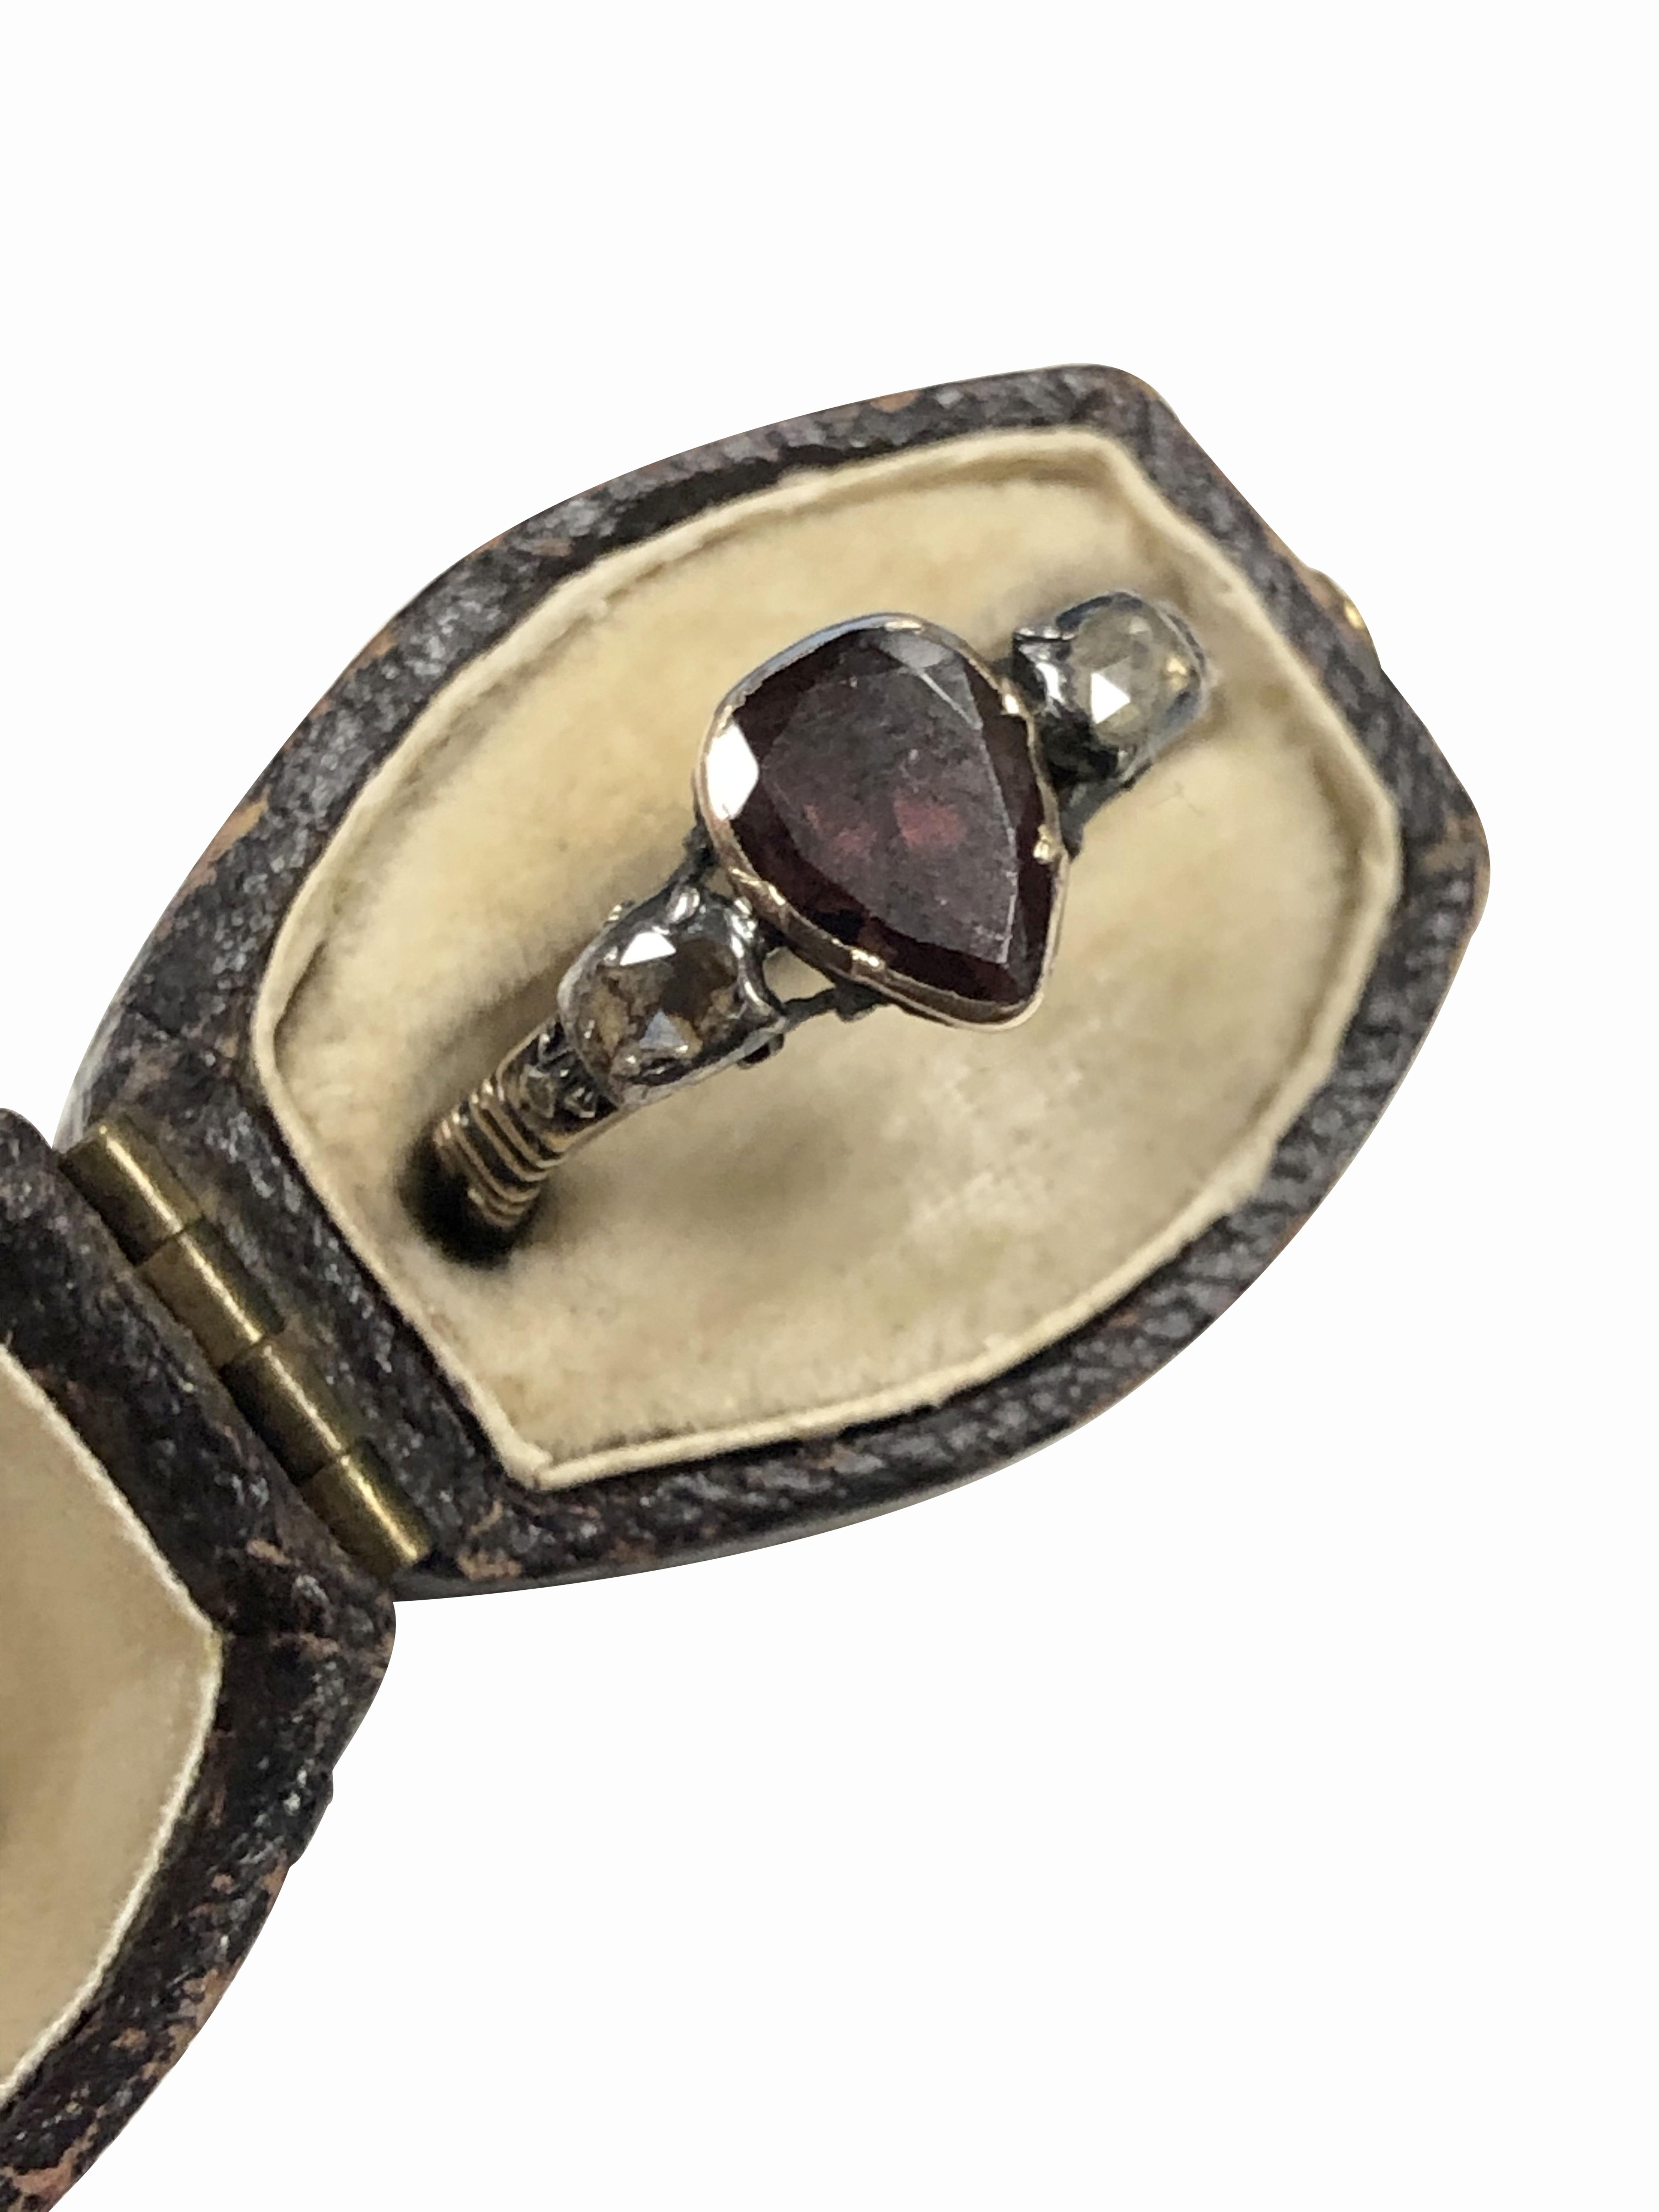 Circa 1850 Yellow Gold and Silver top Ring, centrally set with a Pear shape Garnet measuring 8 X 5 MM and set on either side by a Rose cut Diamond, finger size 5. Comes in original Box, amazing excellent condition on both the ring and box